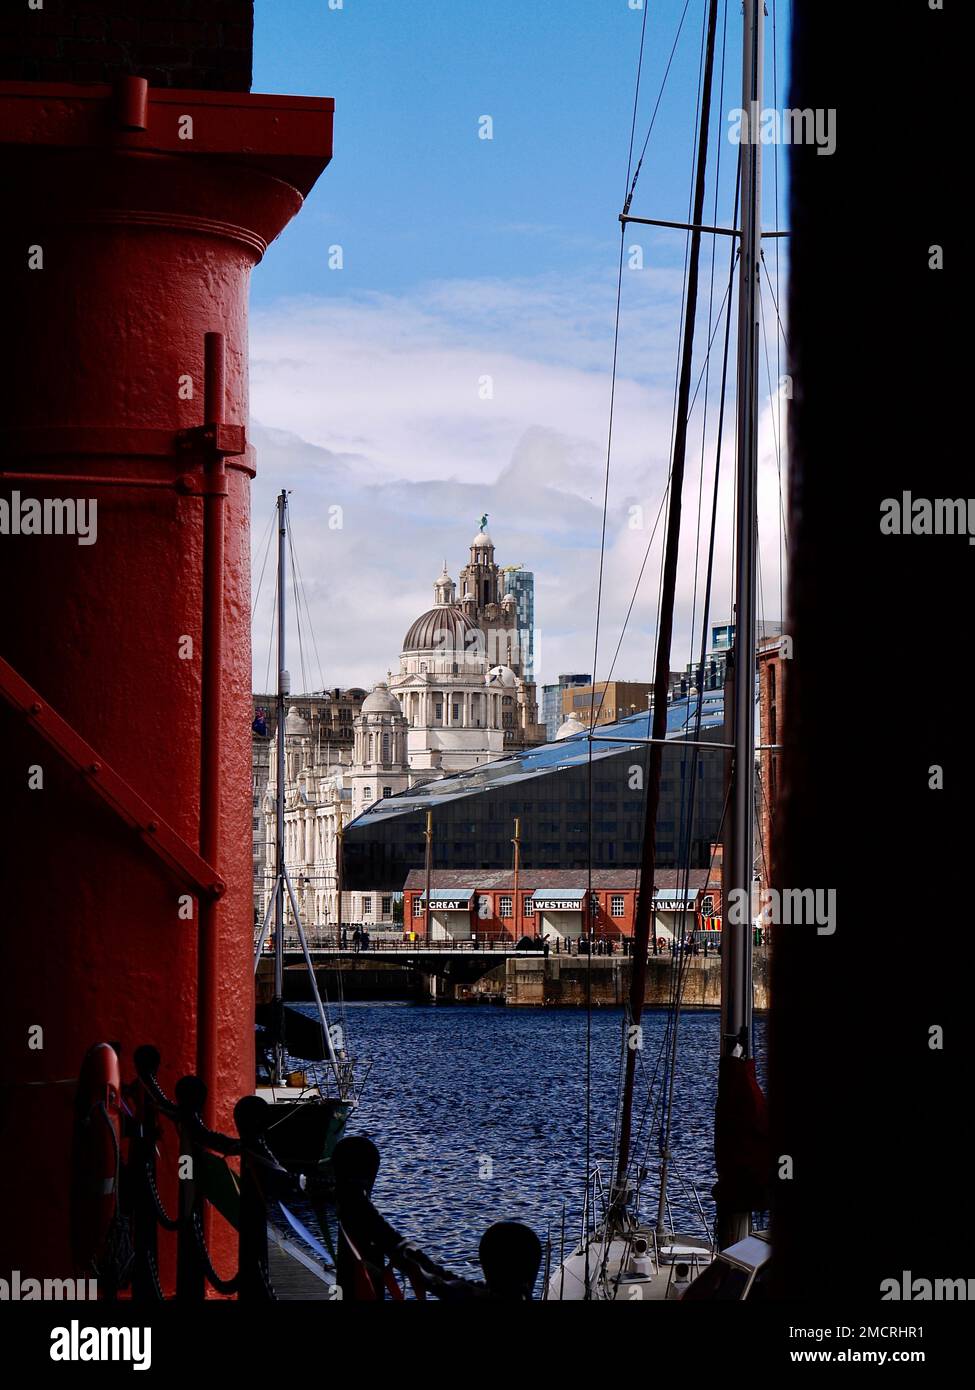 The Liver Building as seen through the imposing red painted columns of the refurbished Royal Albert Dock, Liverpool Stock Photo